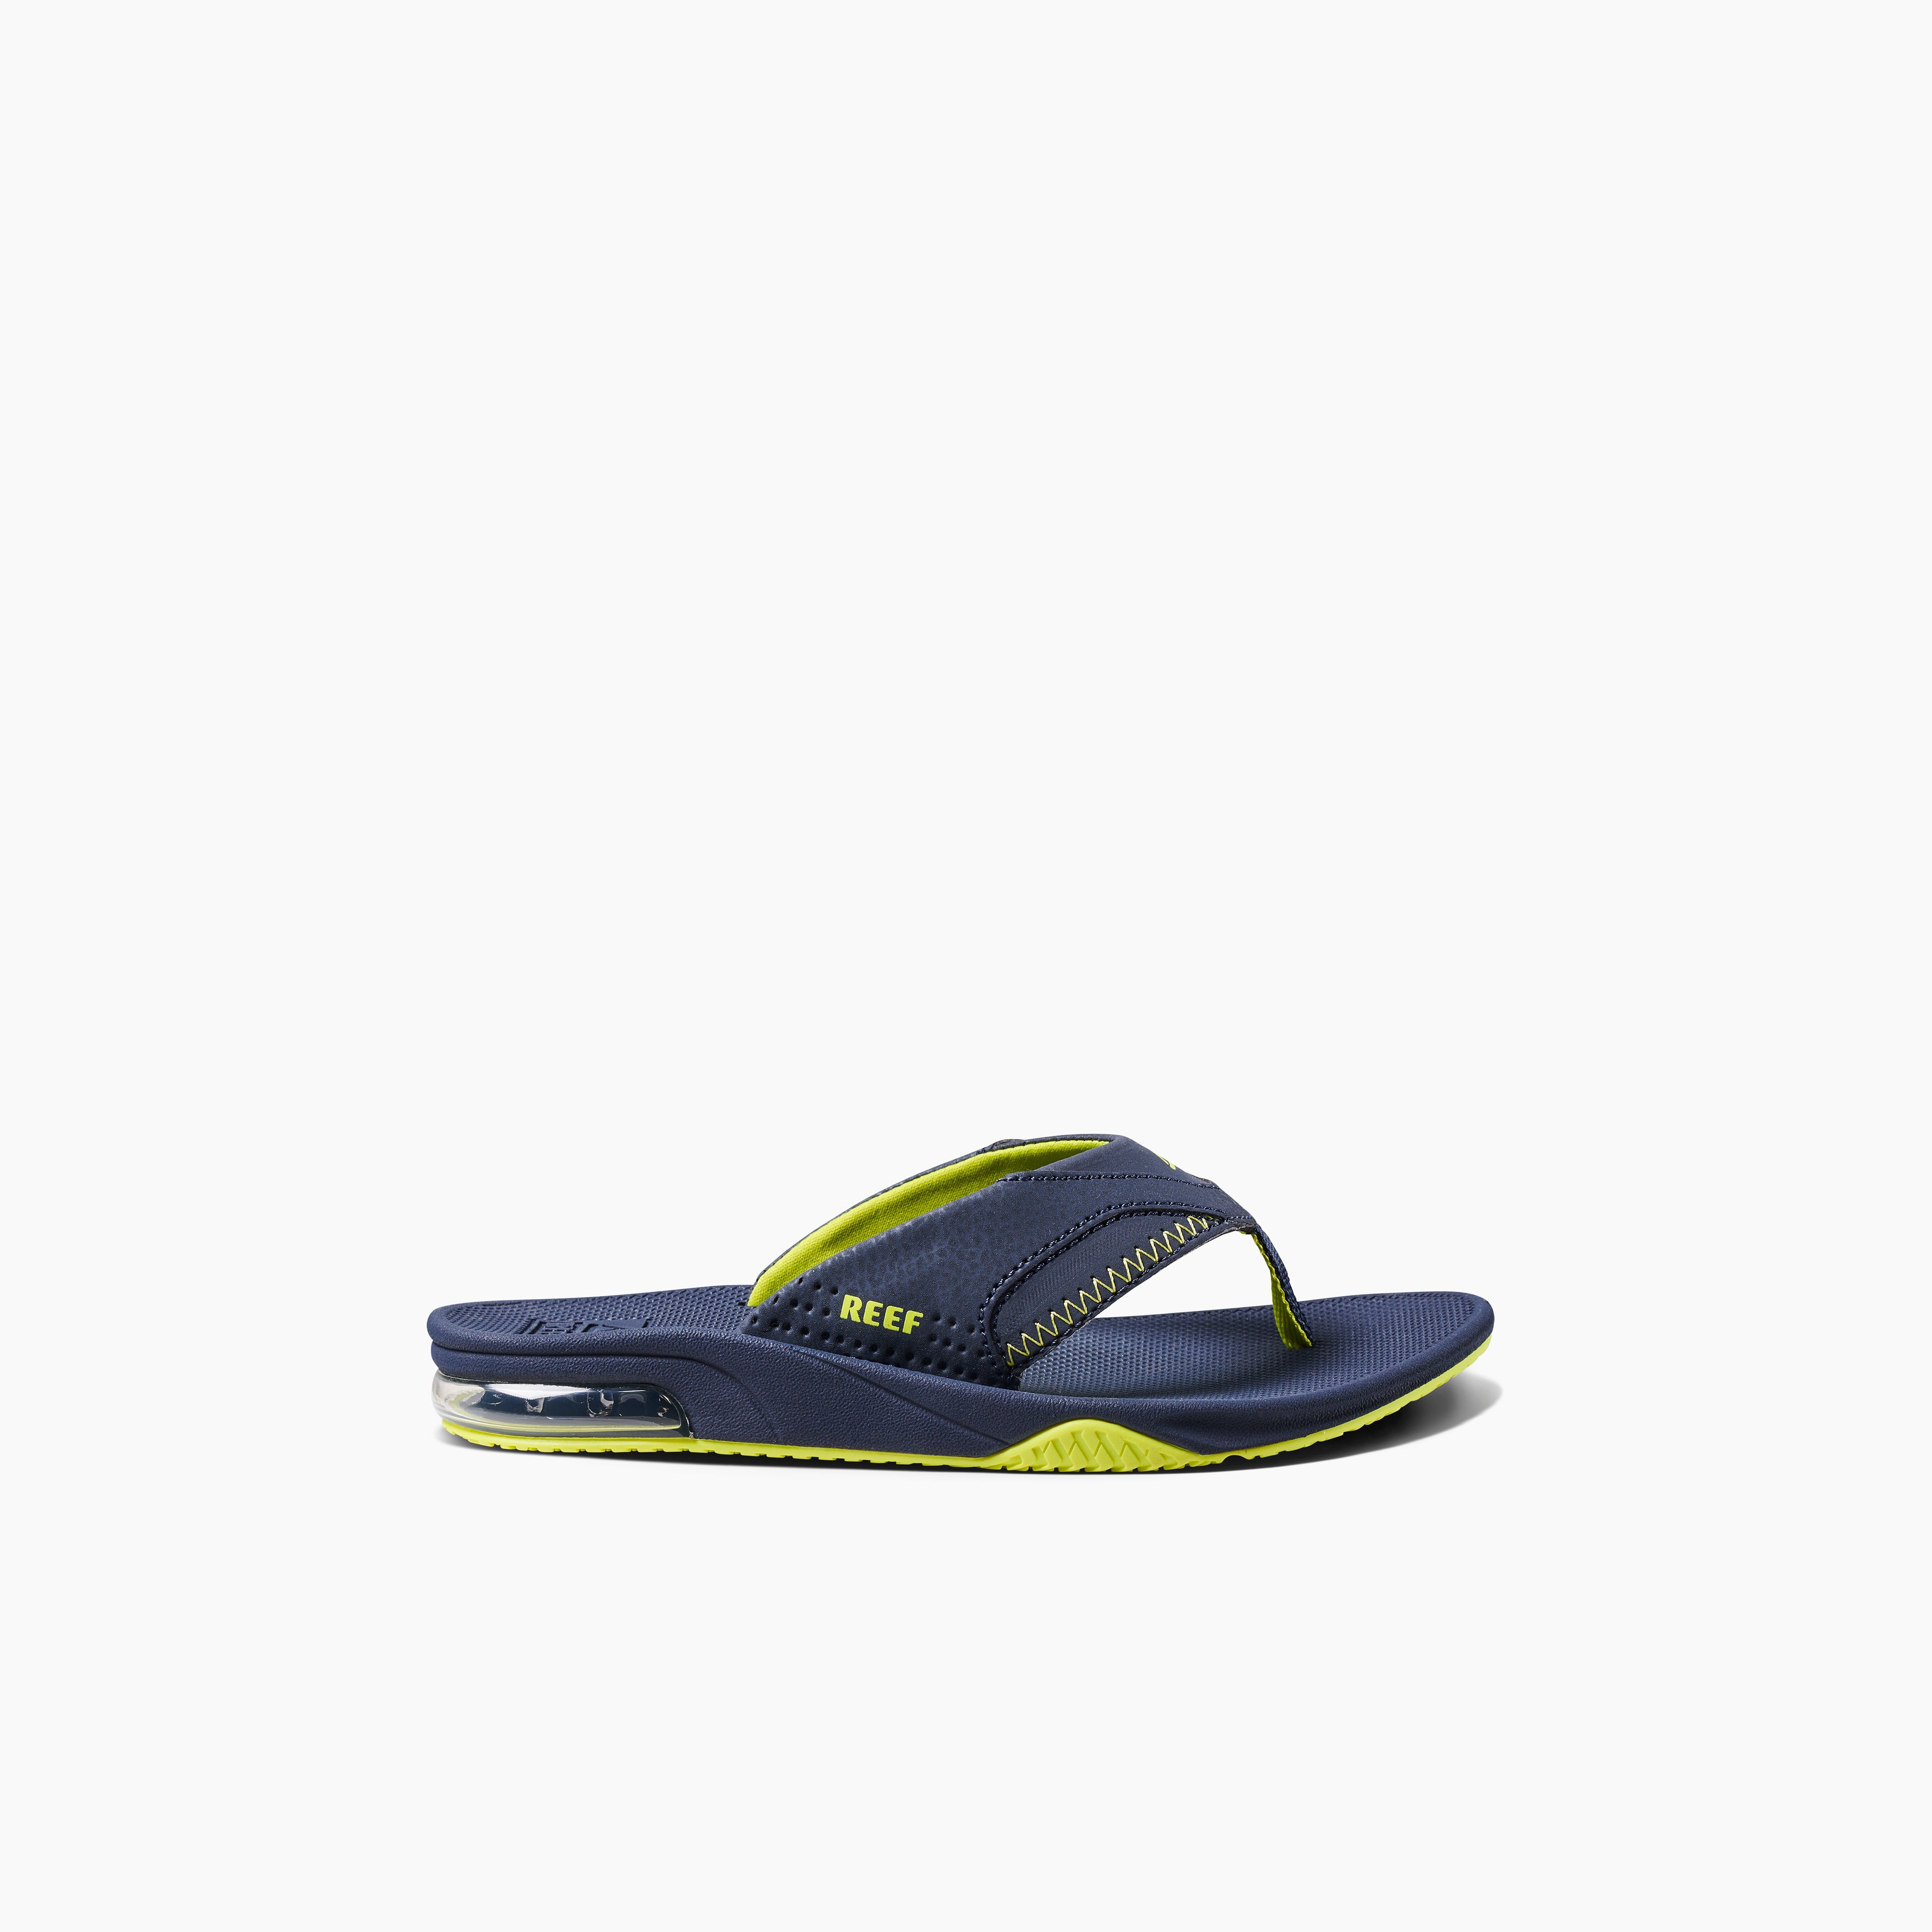 Boy's Kids Fanning Sandals in Lime/Navy side view